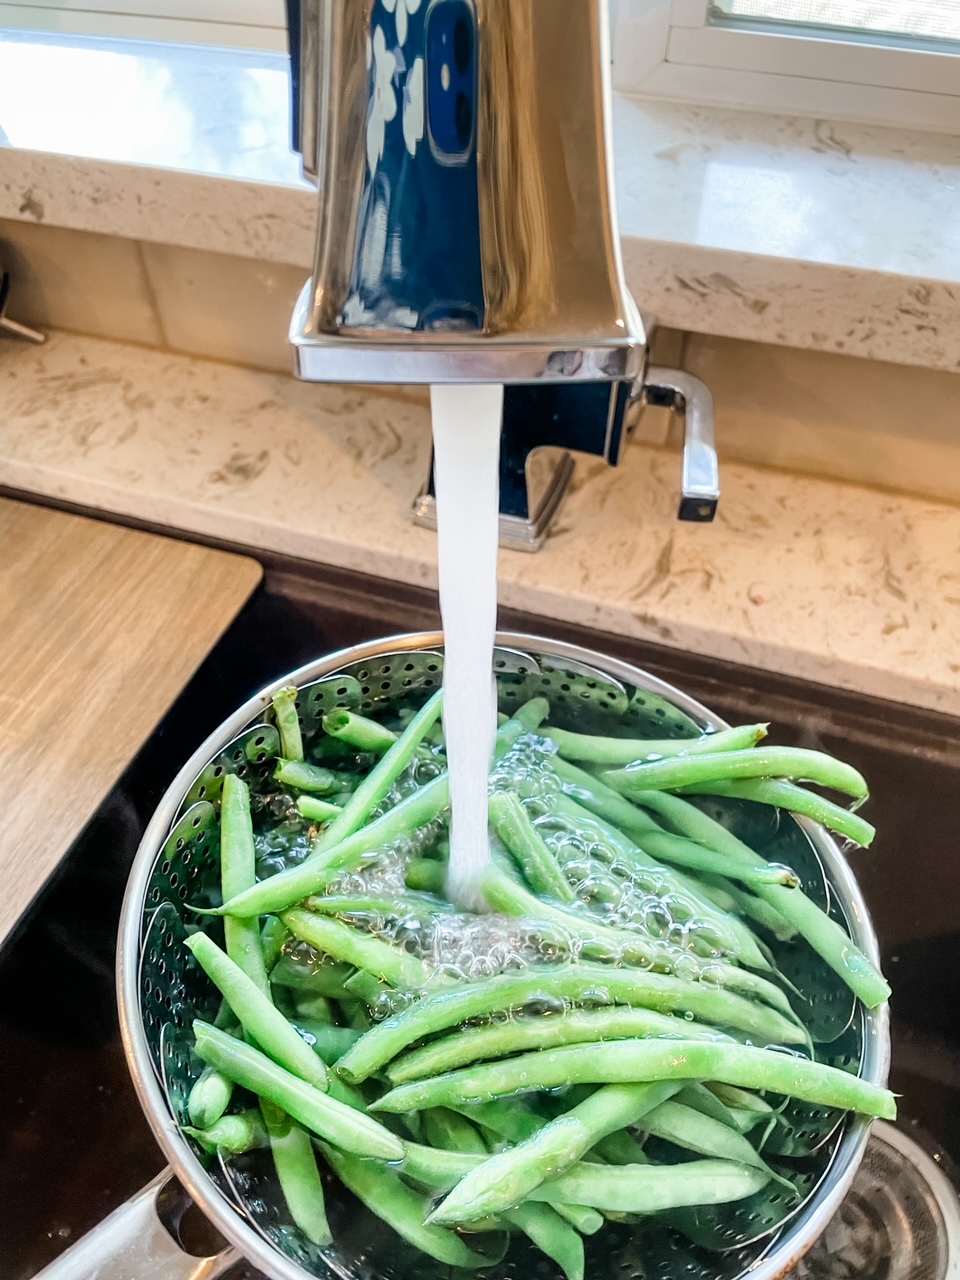 Green beans being run under cold water